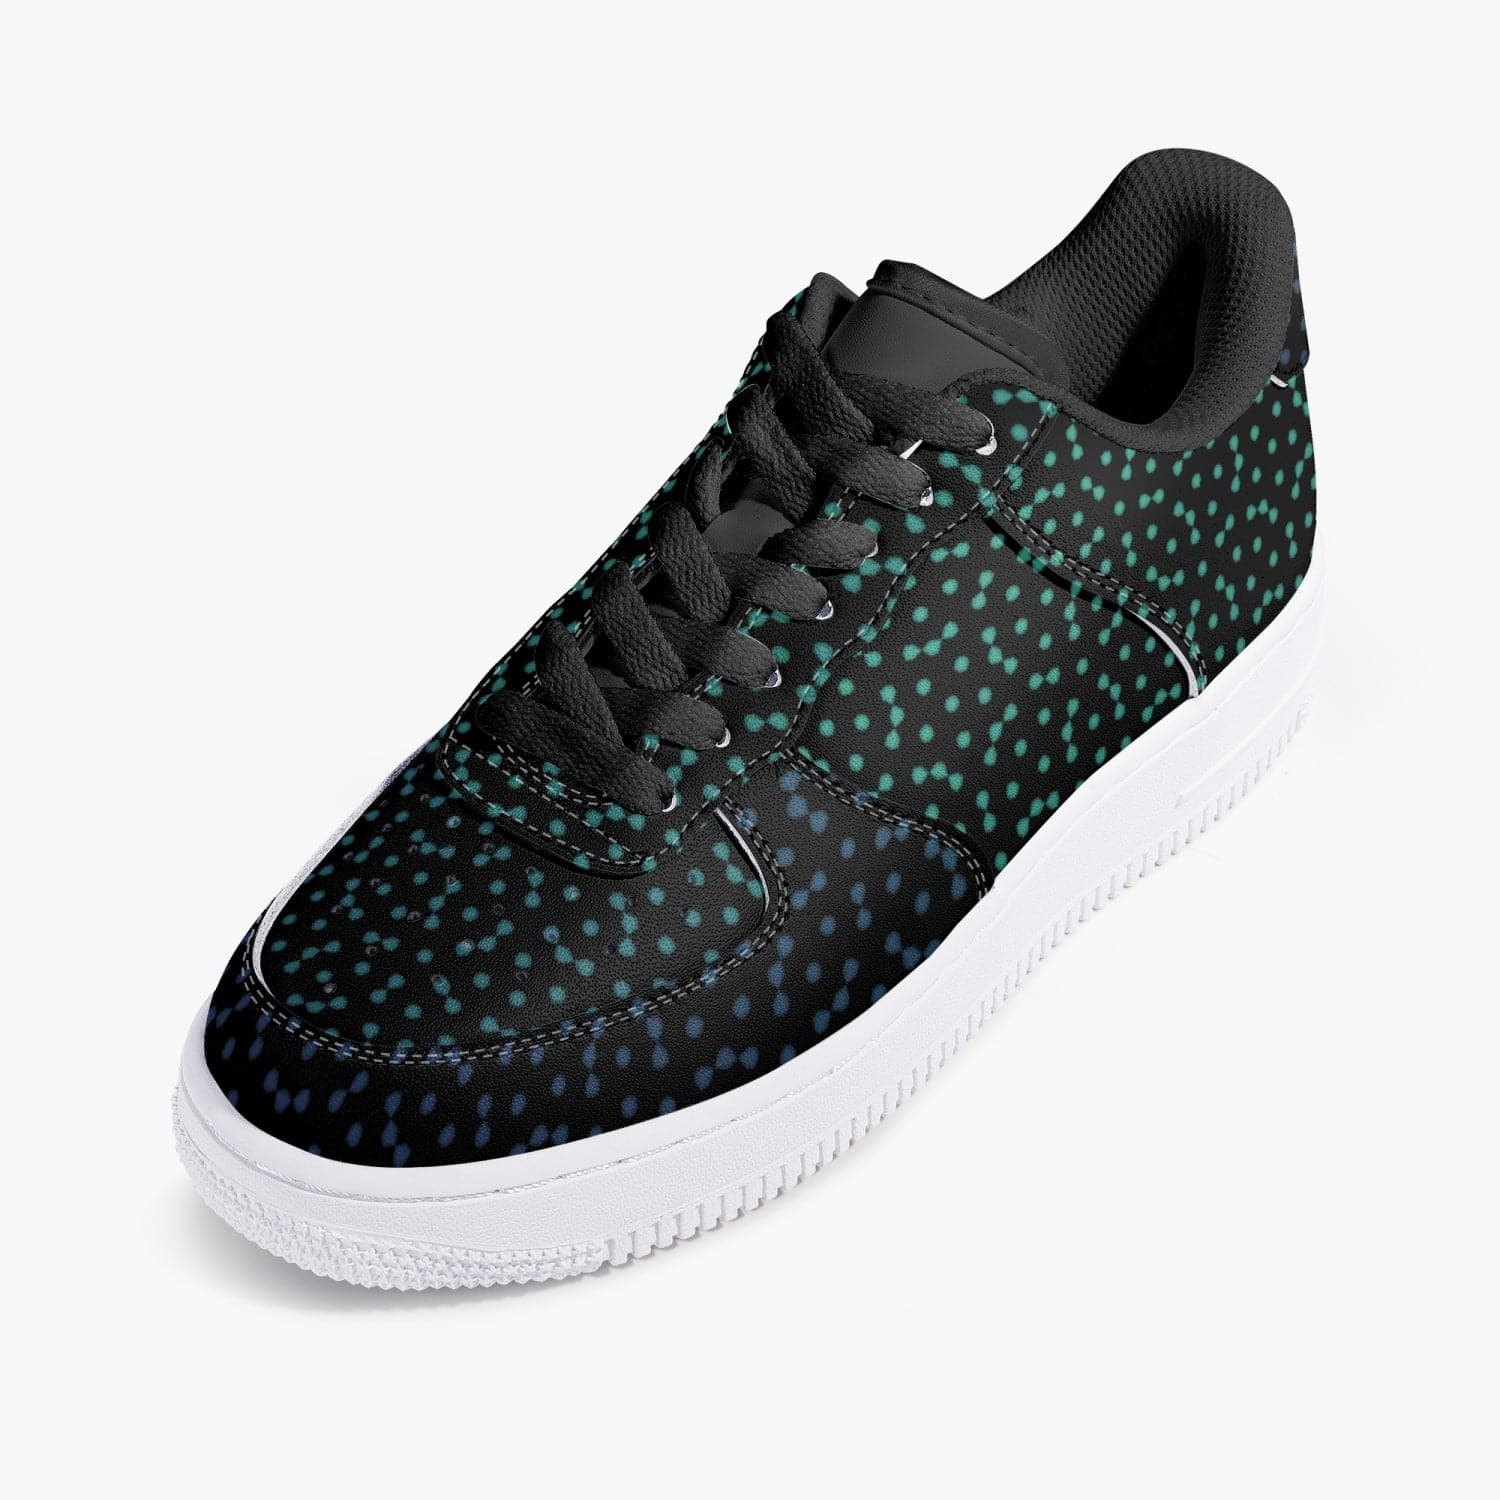 Blue and green night, Stylish 2022 Black Low-Top Leather Sports Sneakers for women, by Sensus Studio Design